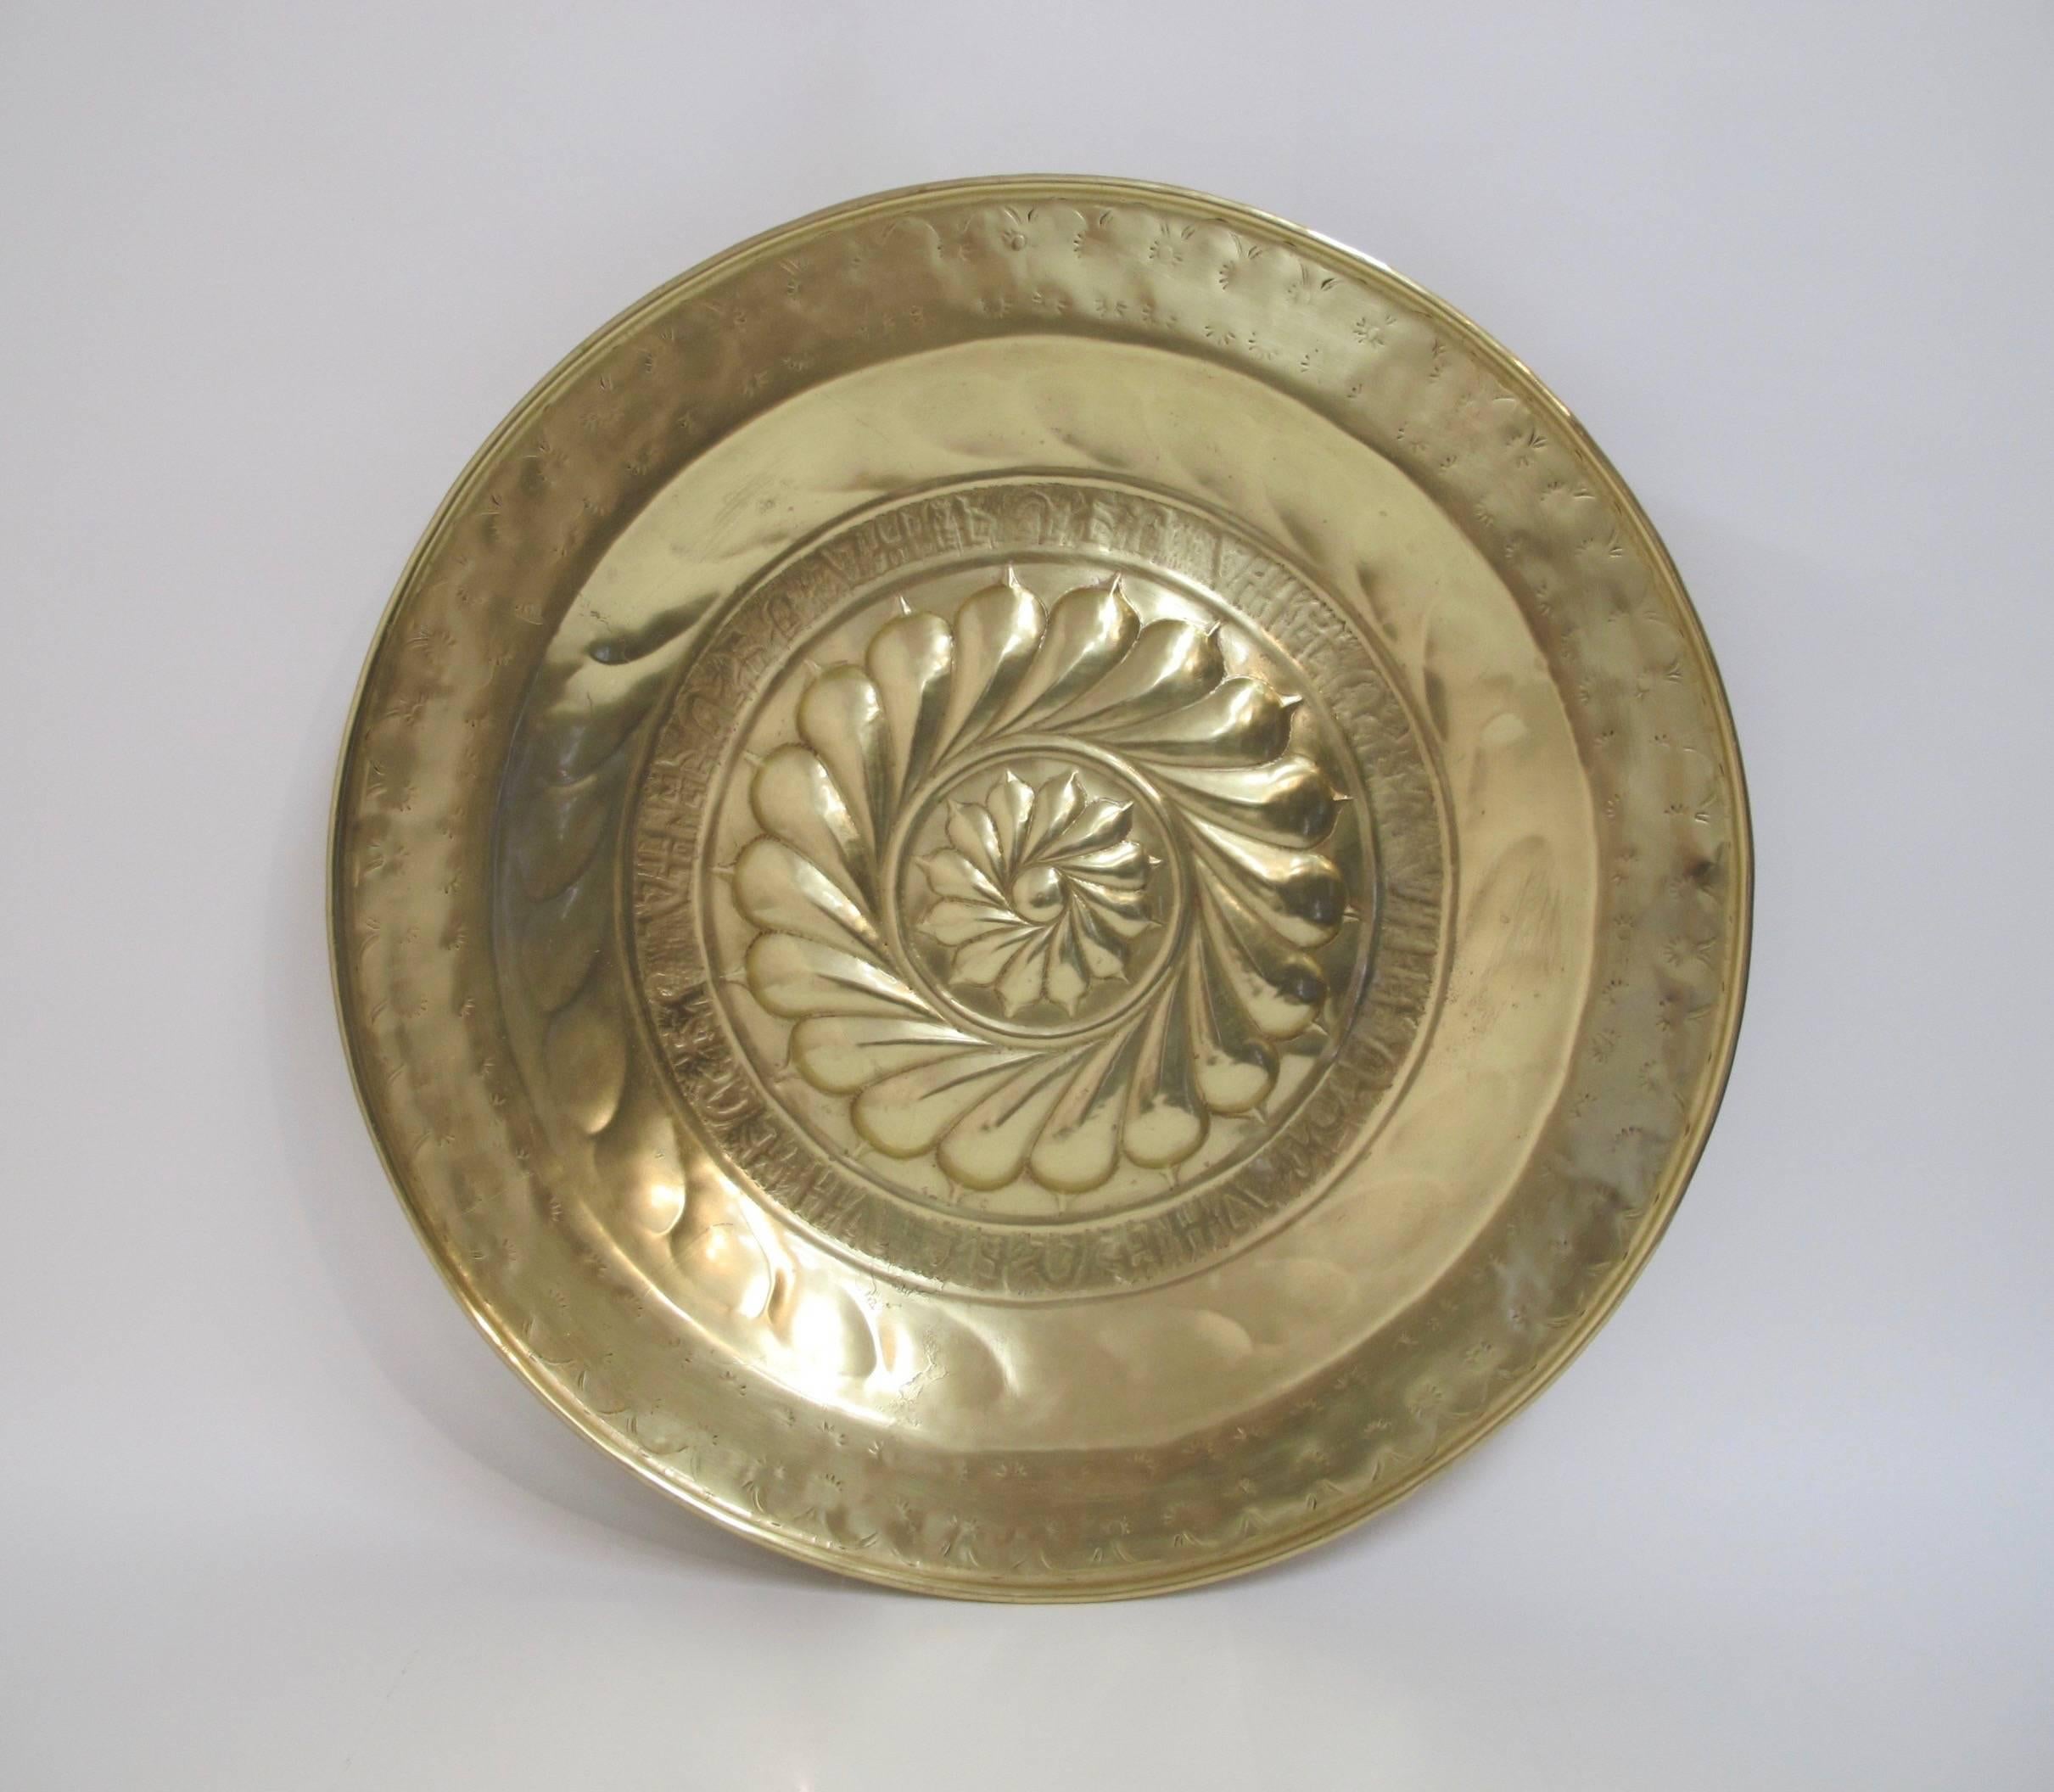 A 17th century or earlier brass alms dish or alms plate.